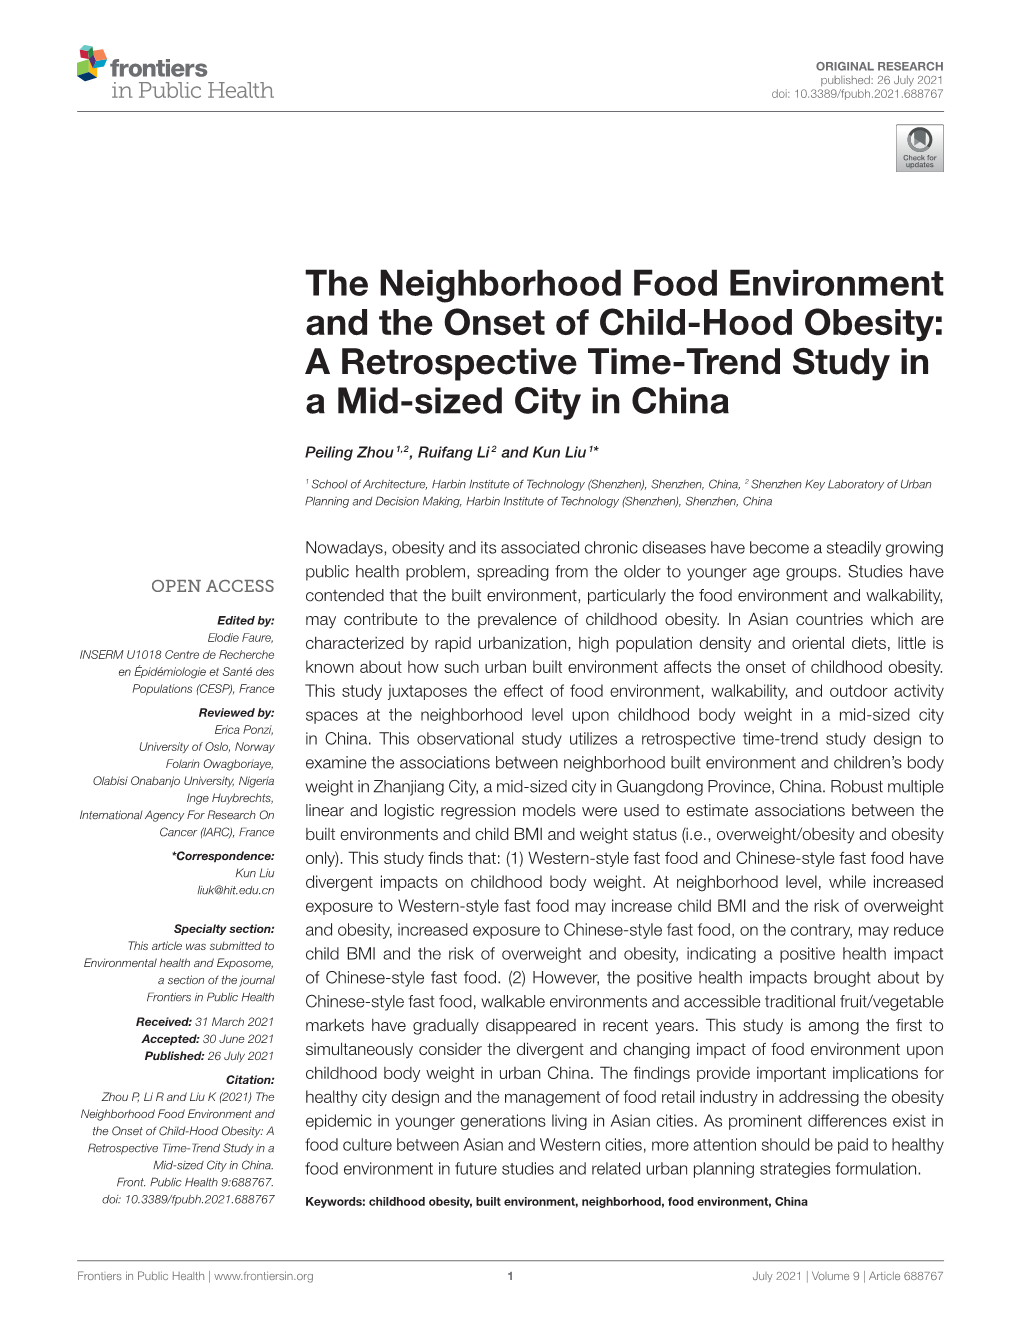 A Retrospective Time-Trend Study in a Mid-Sized City in China